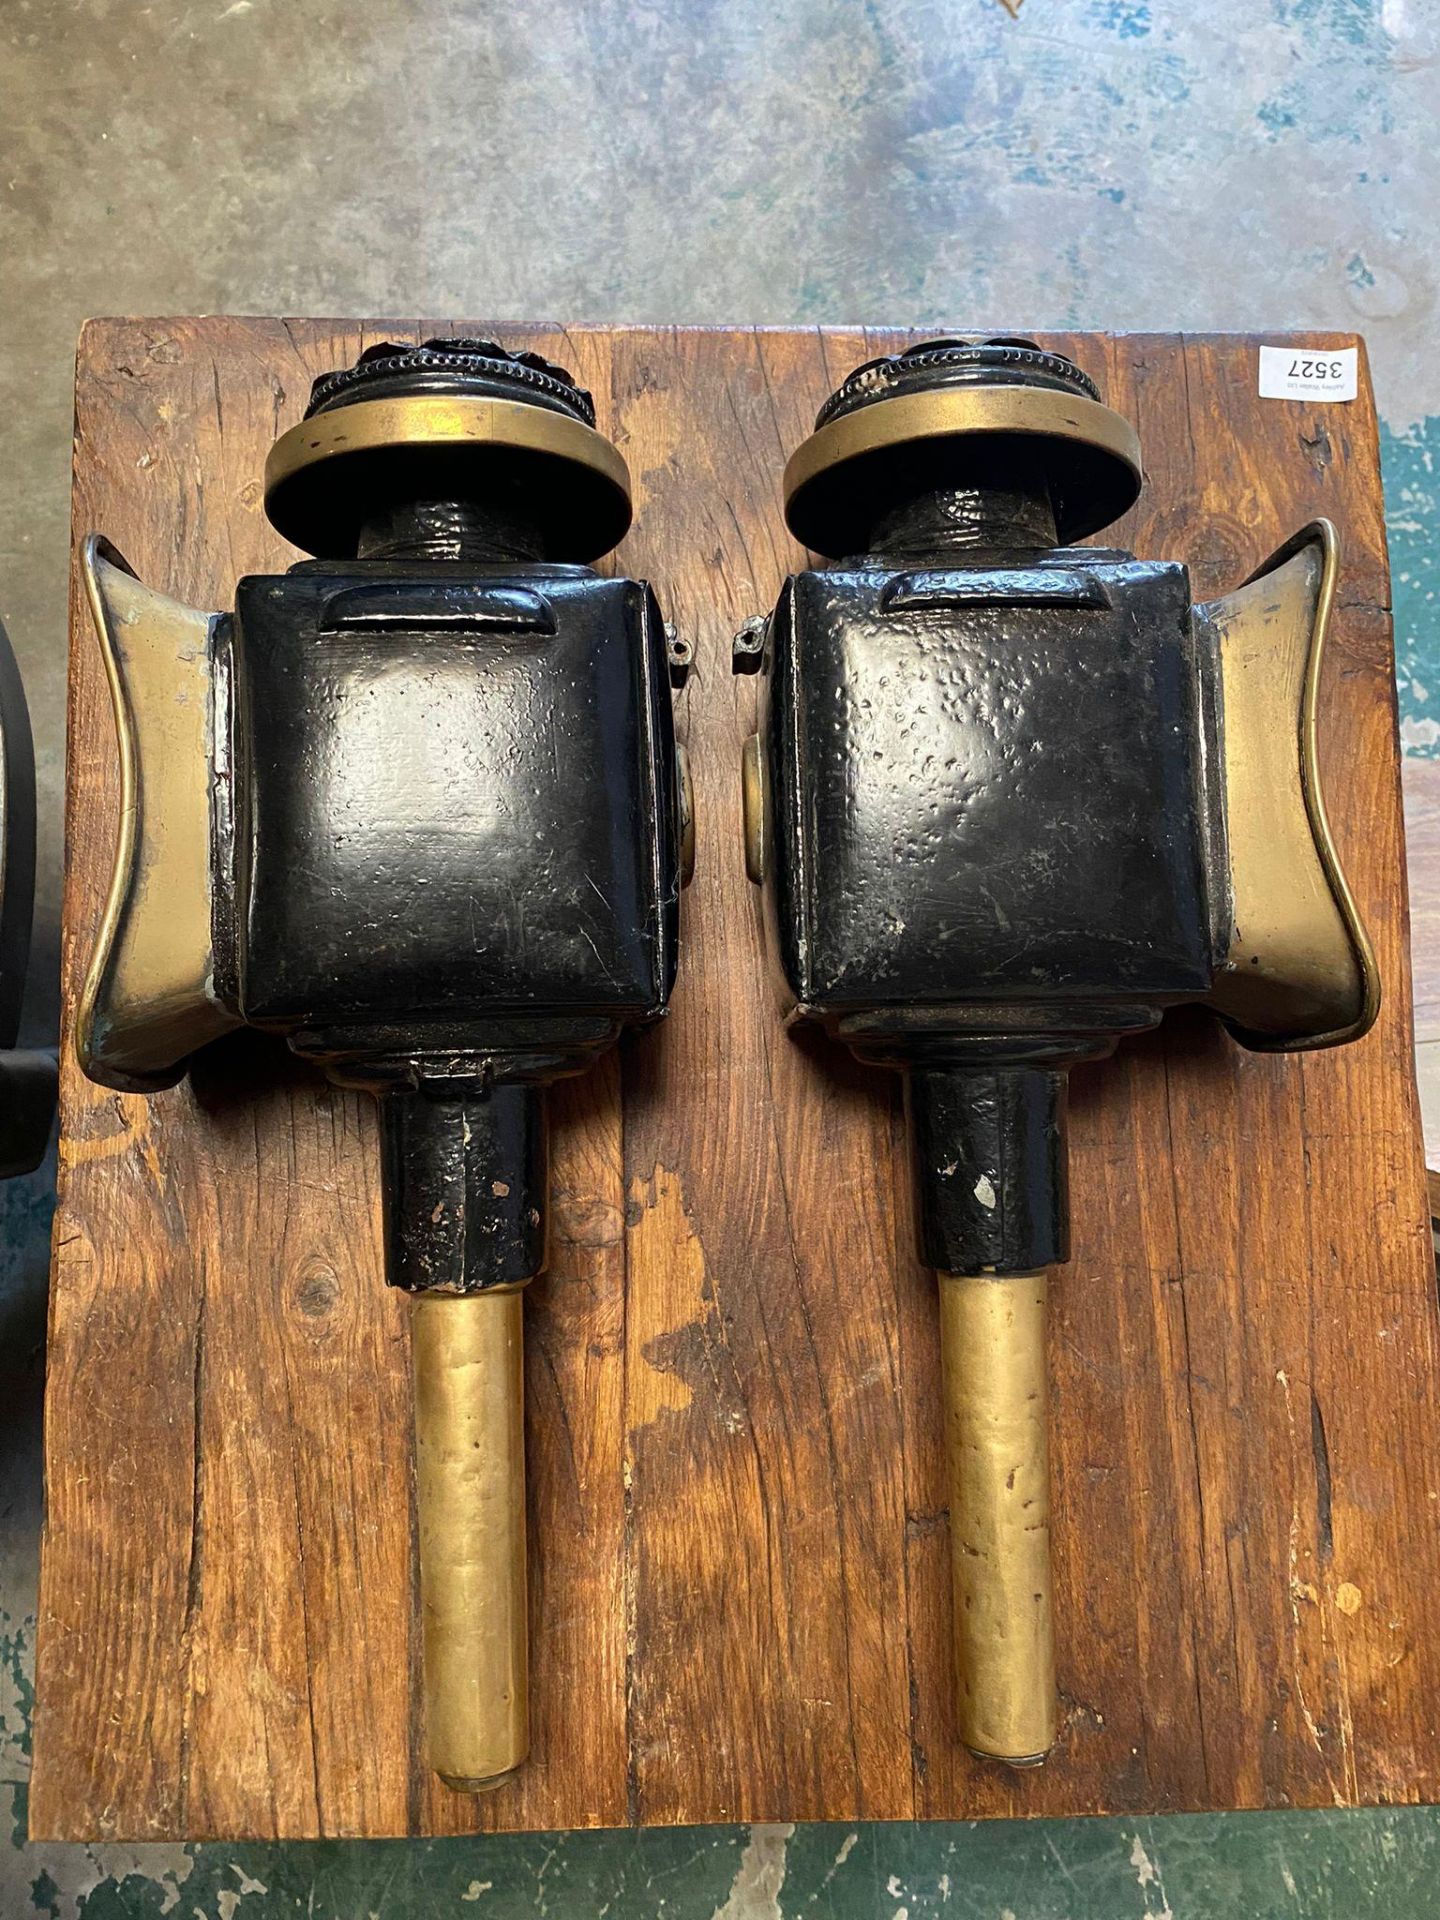 PAIR OF EARLY CARRIAGE LAMPS BY "ROGERS AND SONS" OF OSWESTRY - Image 3 of 4